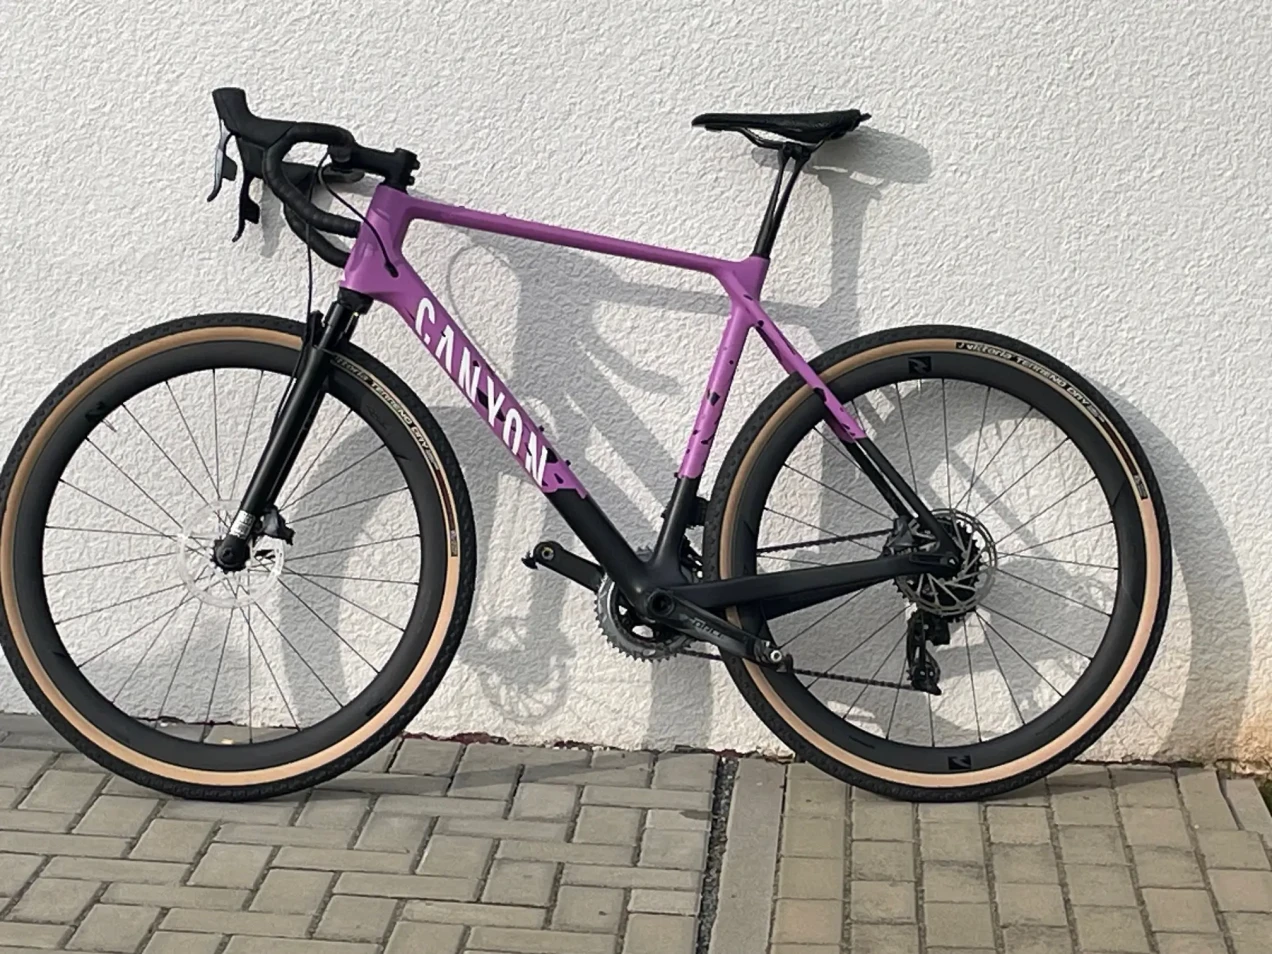 Canyon Grizl CF SLX 8 eTap Suspension used in L | buycycle